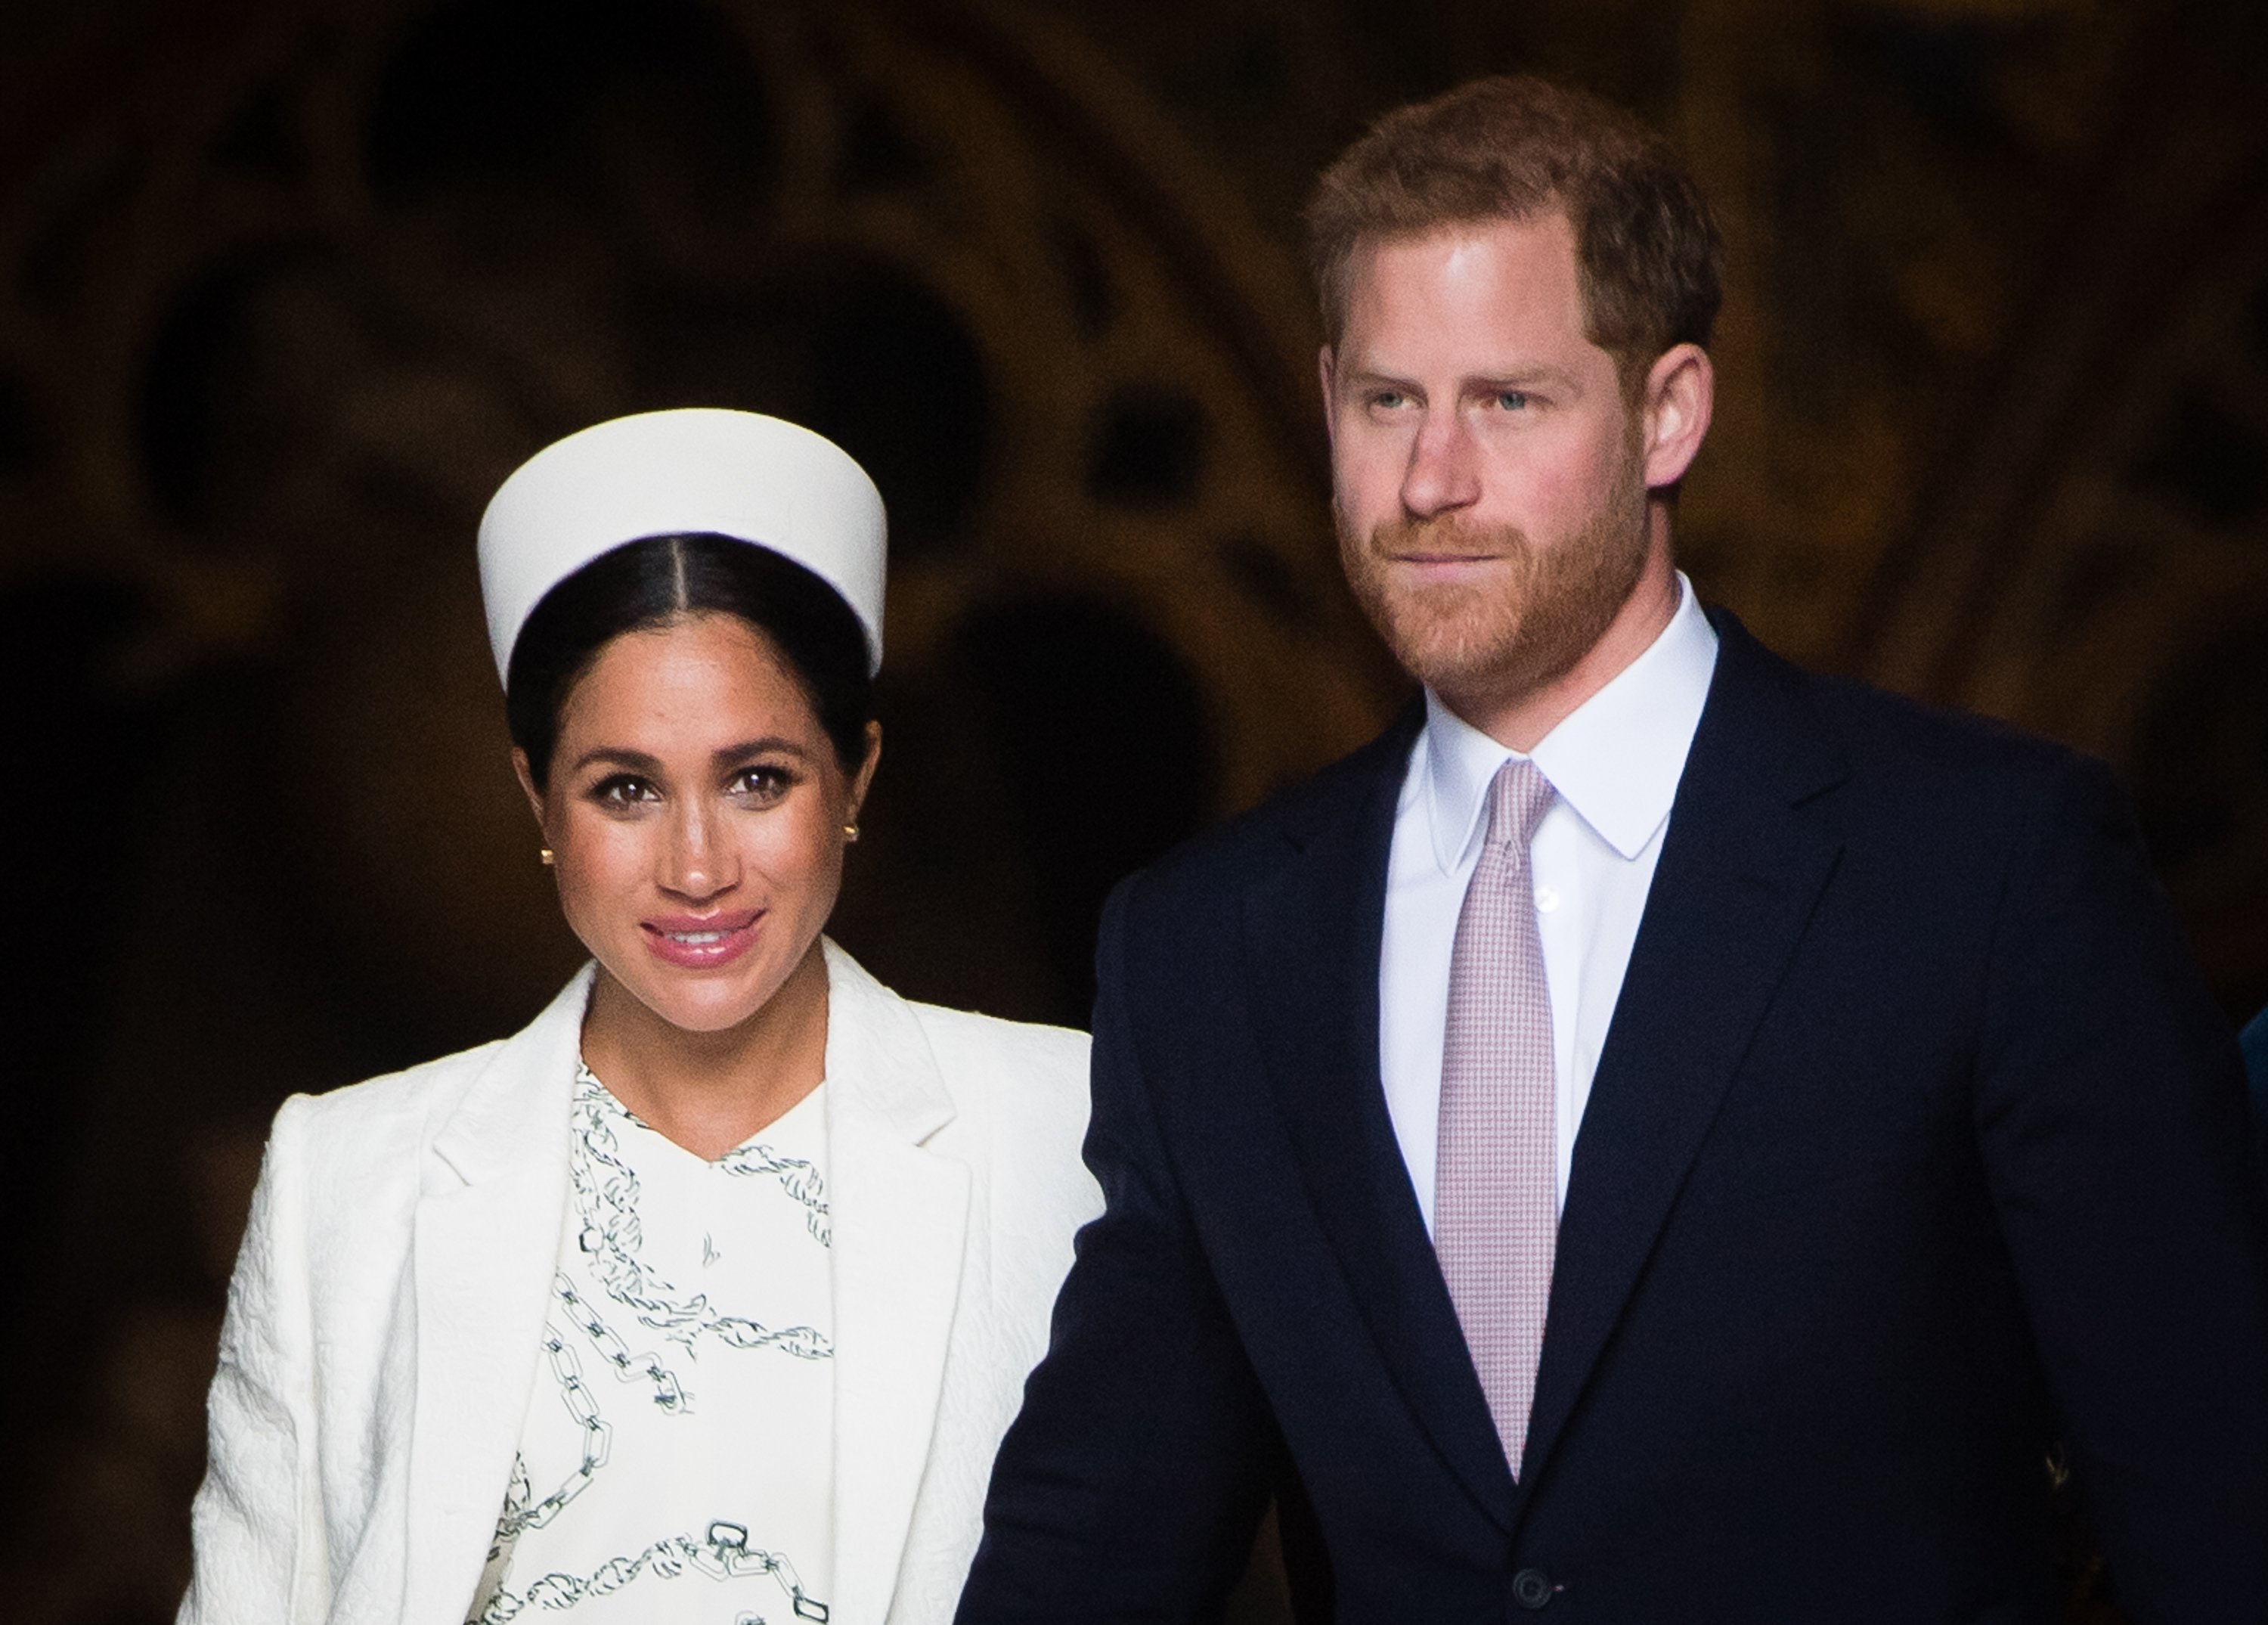 Prince Harry, Duke of Sussex and Meghan, Duchess of Sussex attend the Commonwealth Day service at Westminster Abbe6 on March 11, 2019 in London, England. | Source: Getty Images